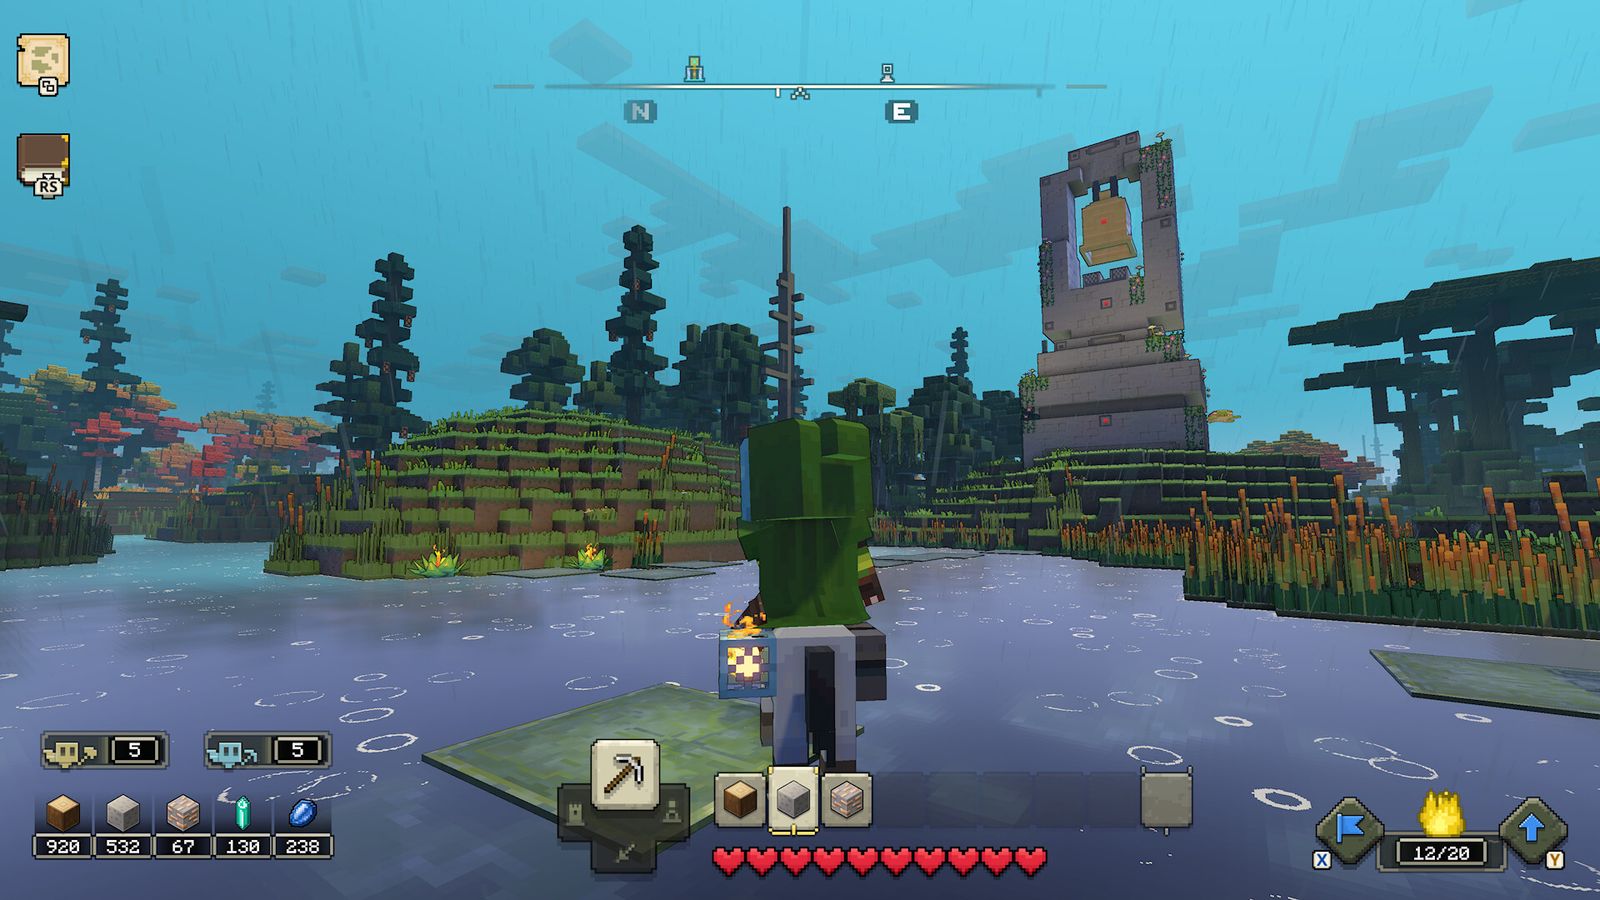 In-game image from Minecraft Legends of a character wearing green riding a horse across water.